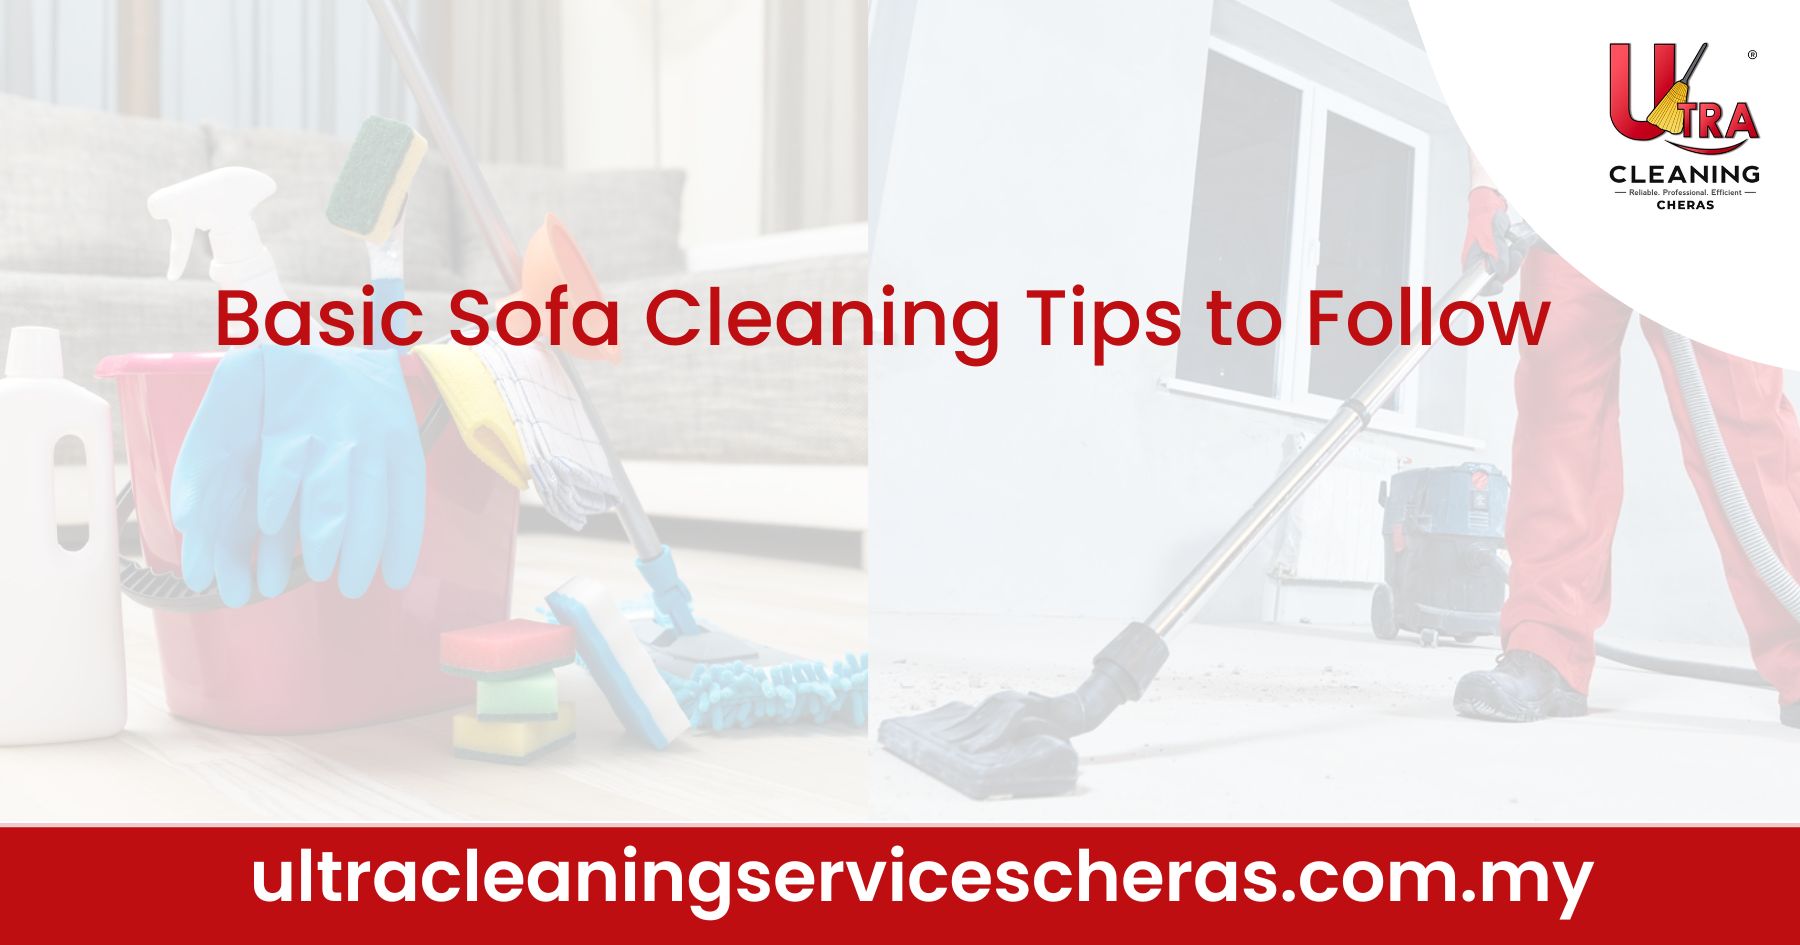 Basic Sofa Cleaning Tips to Follow